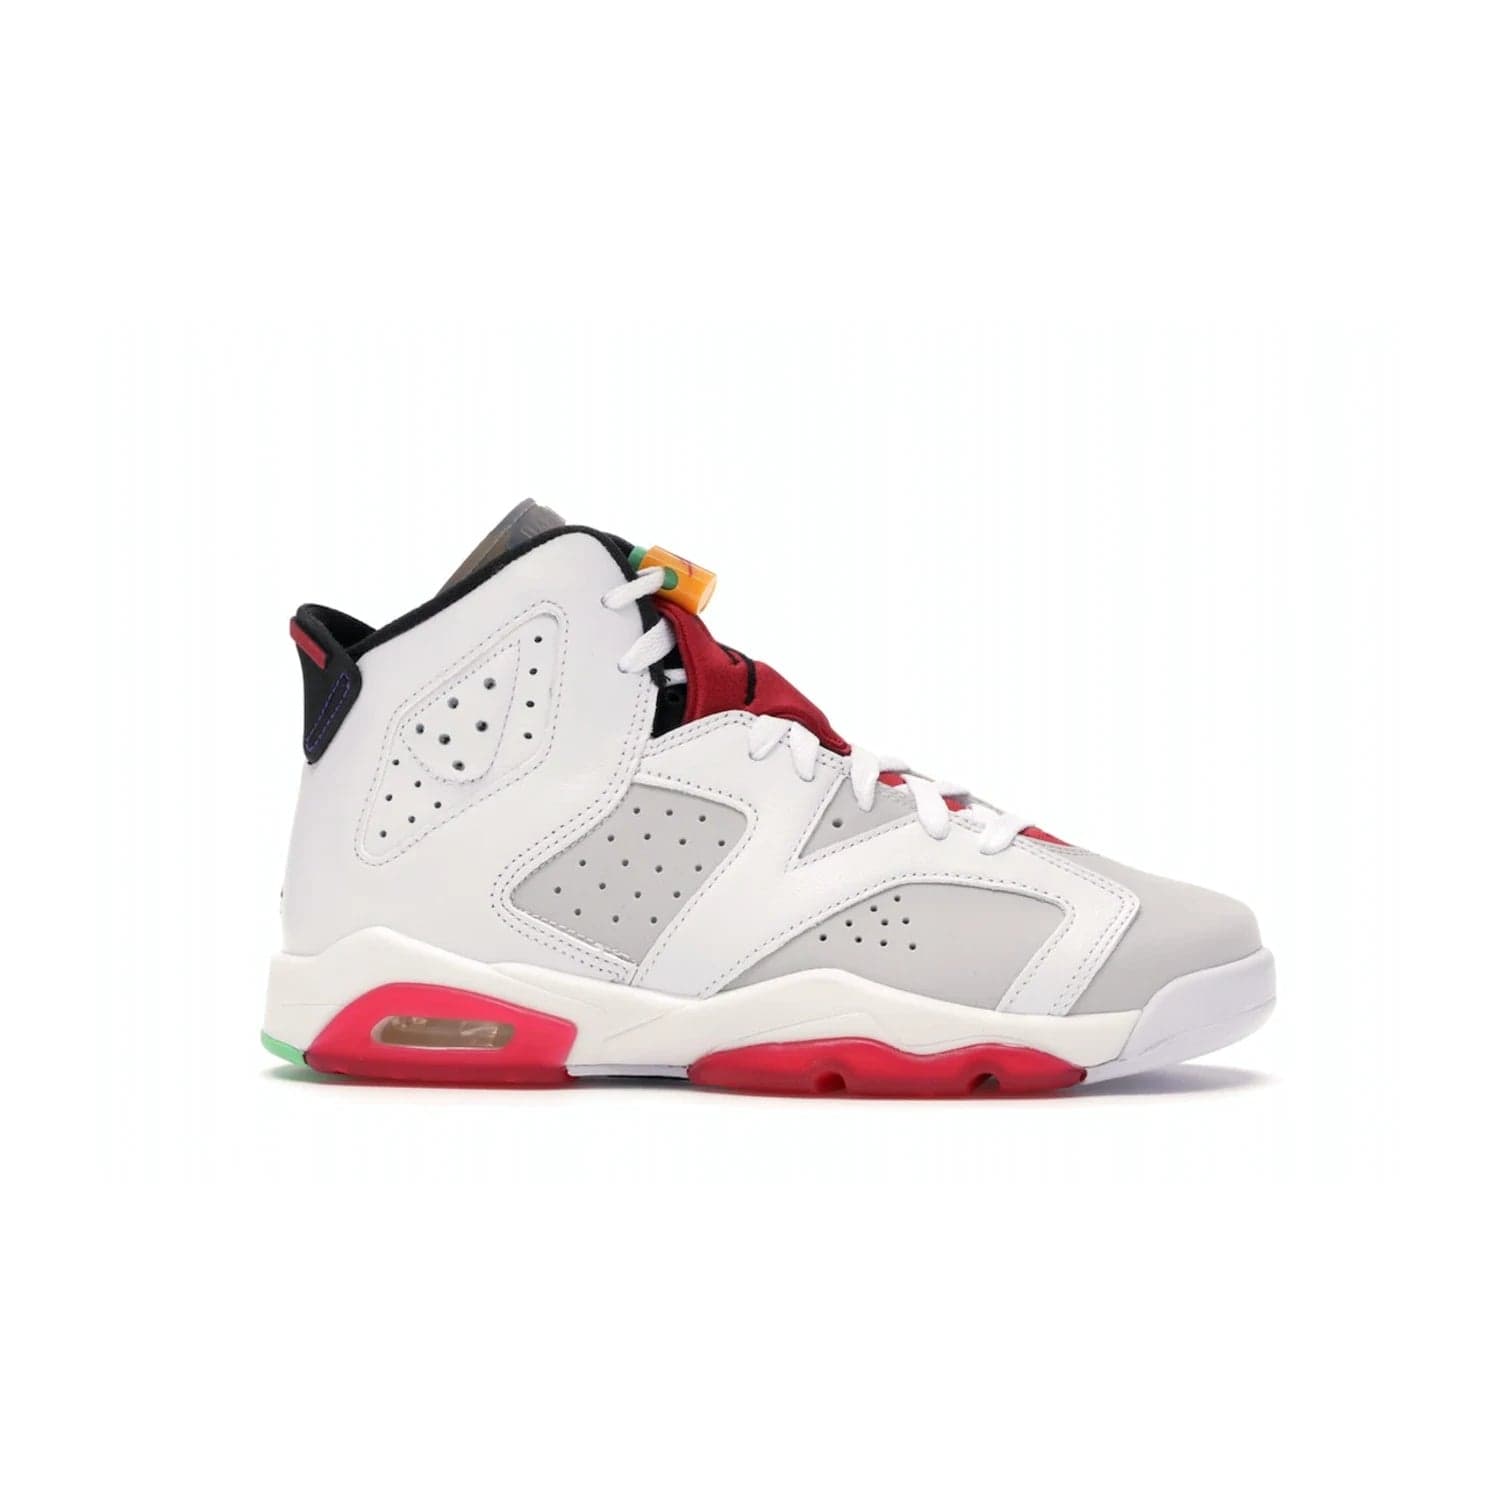 Jordan 6 Retro Hare (GS) - Image 2 - Only at www.BallersClubKickz.com - The Air Jordan 6 Hare GS. Comfortable suede upper, perforations, red pods, two-tone midsole, and signature "Jumpman" emblem. Released 17 June 2020. Perfect for any sneakerhead.